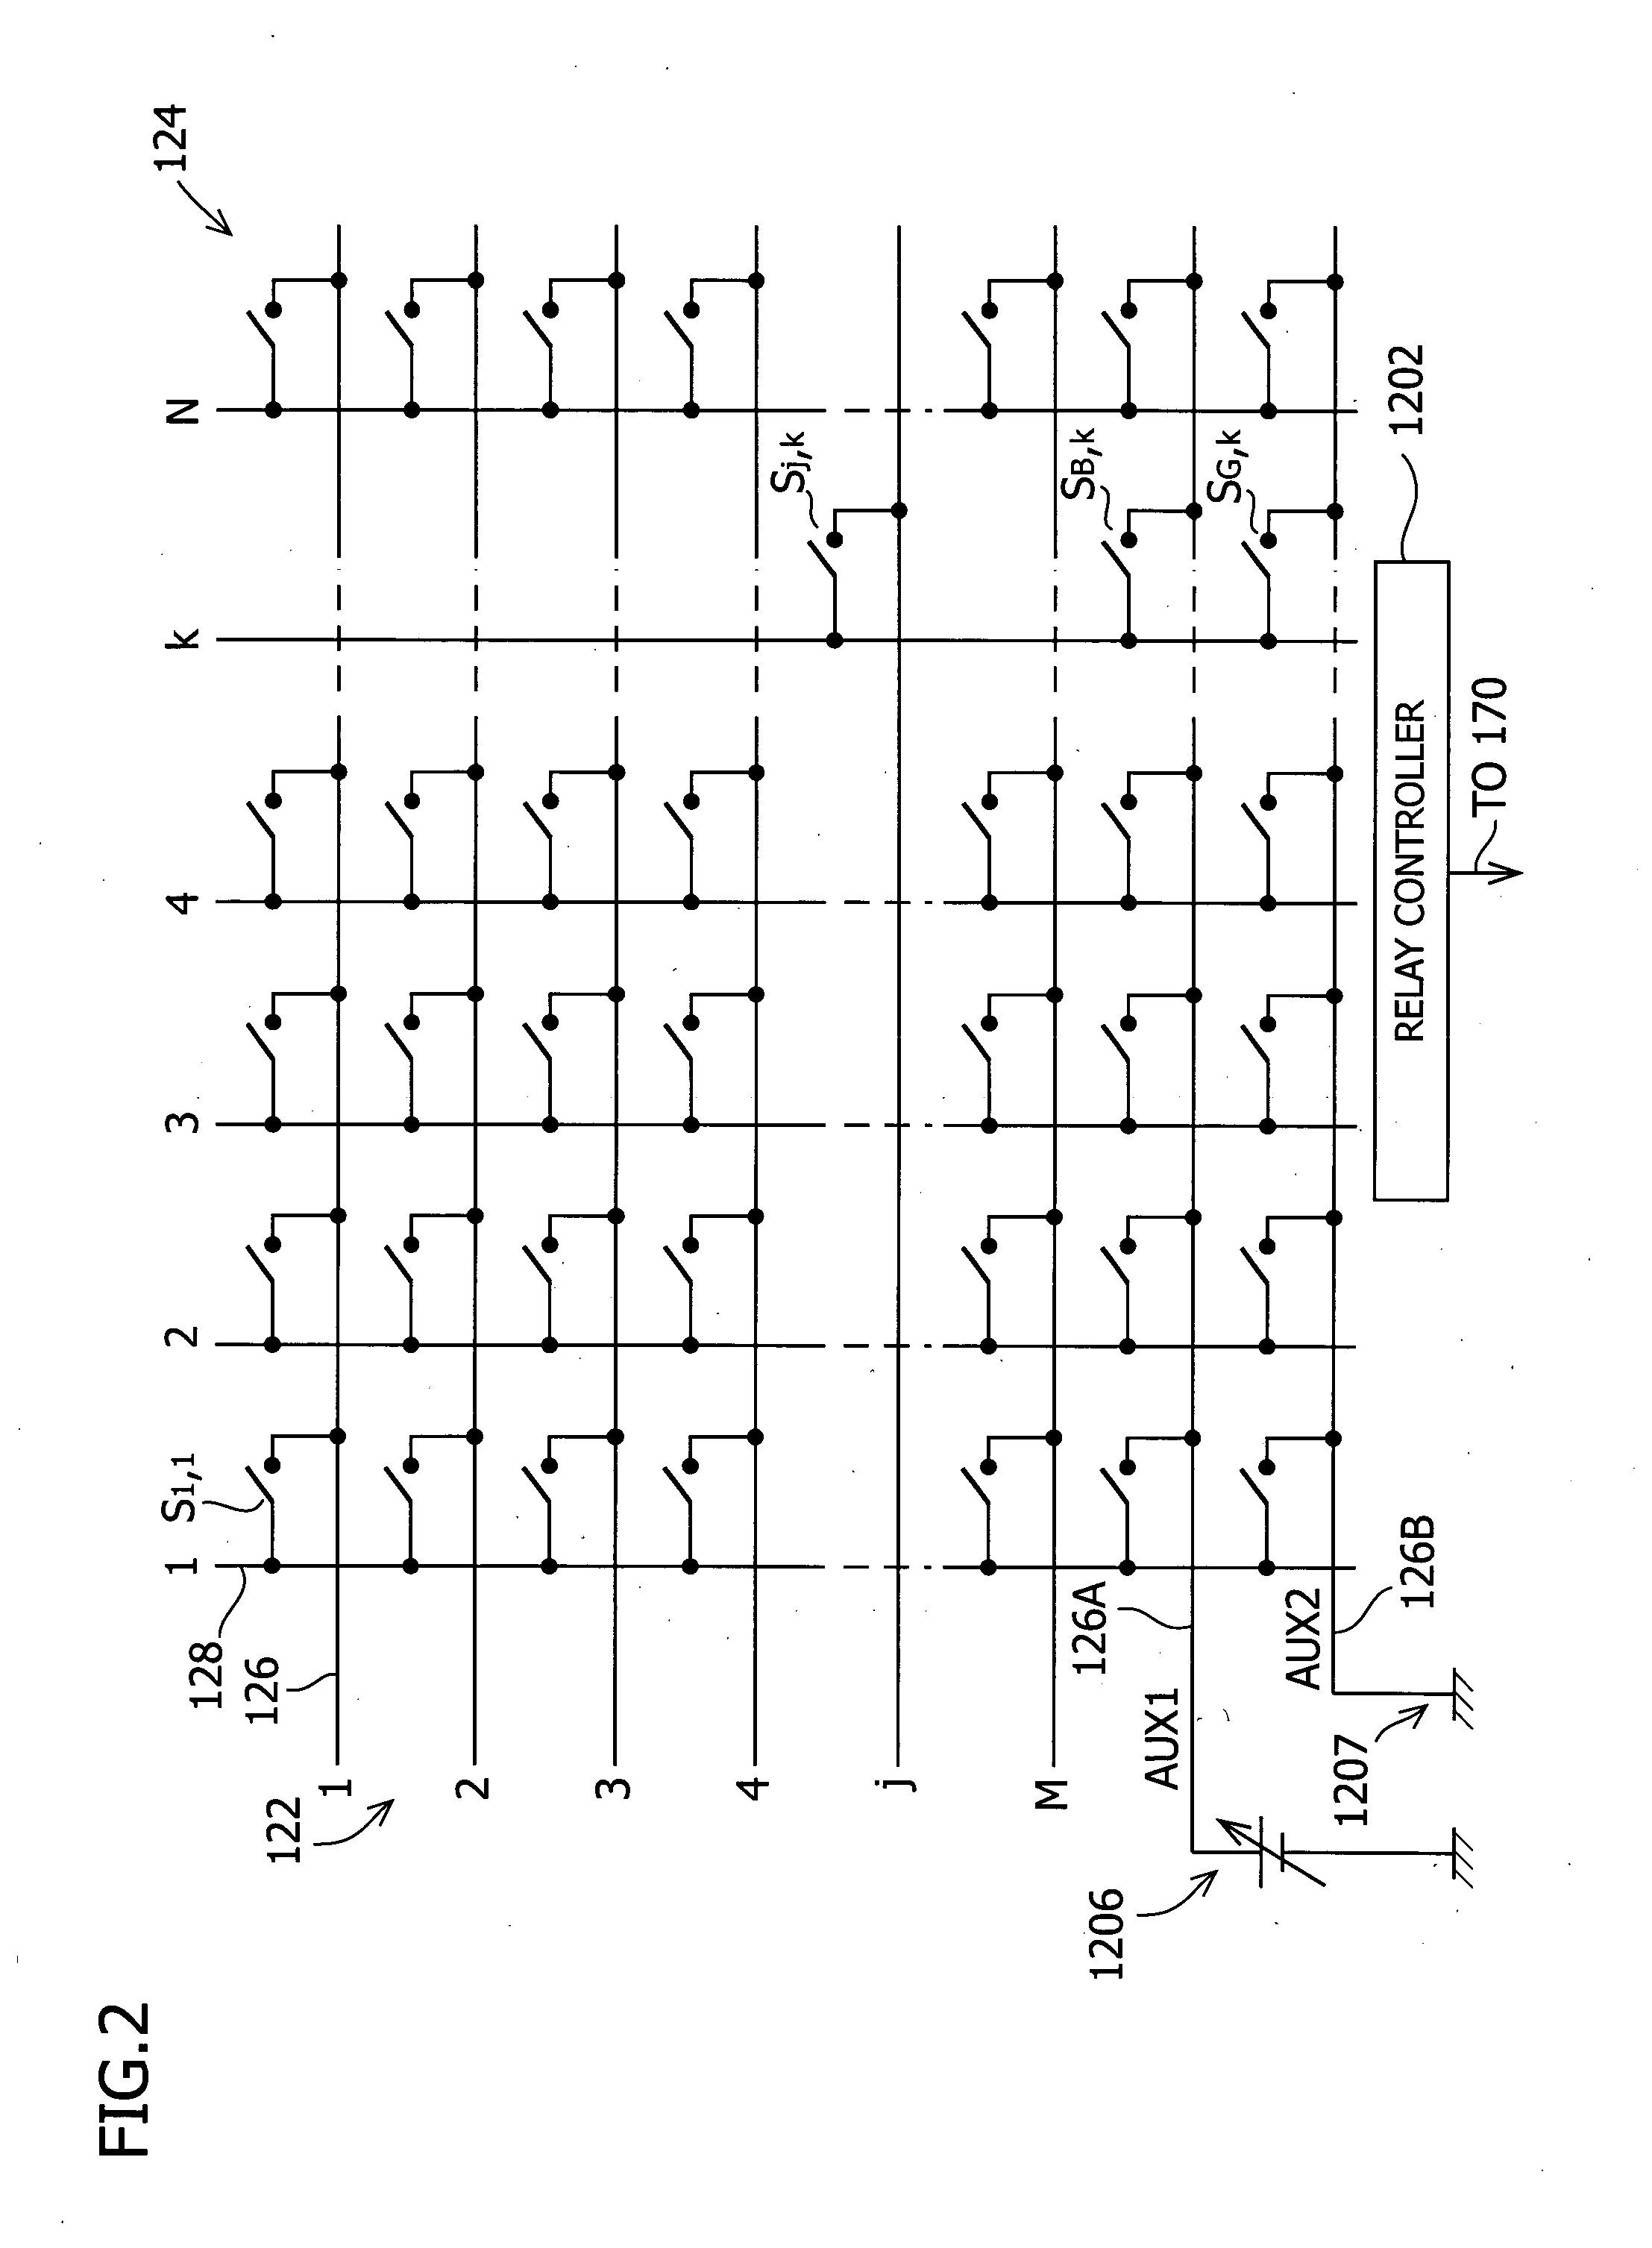 Switching matrix apparatus for semiconductor characteristic measurement apparatus